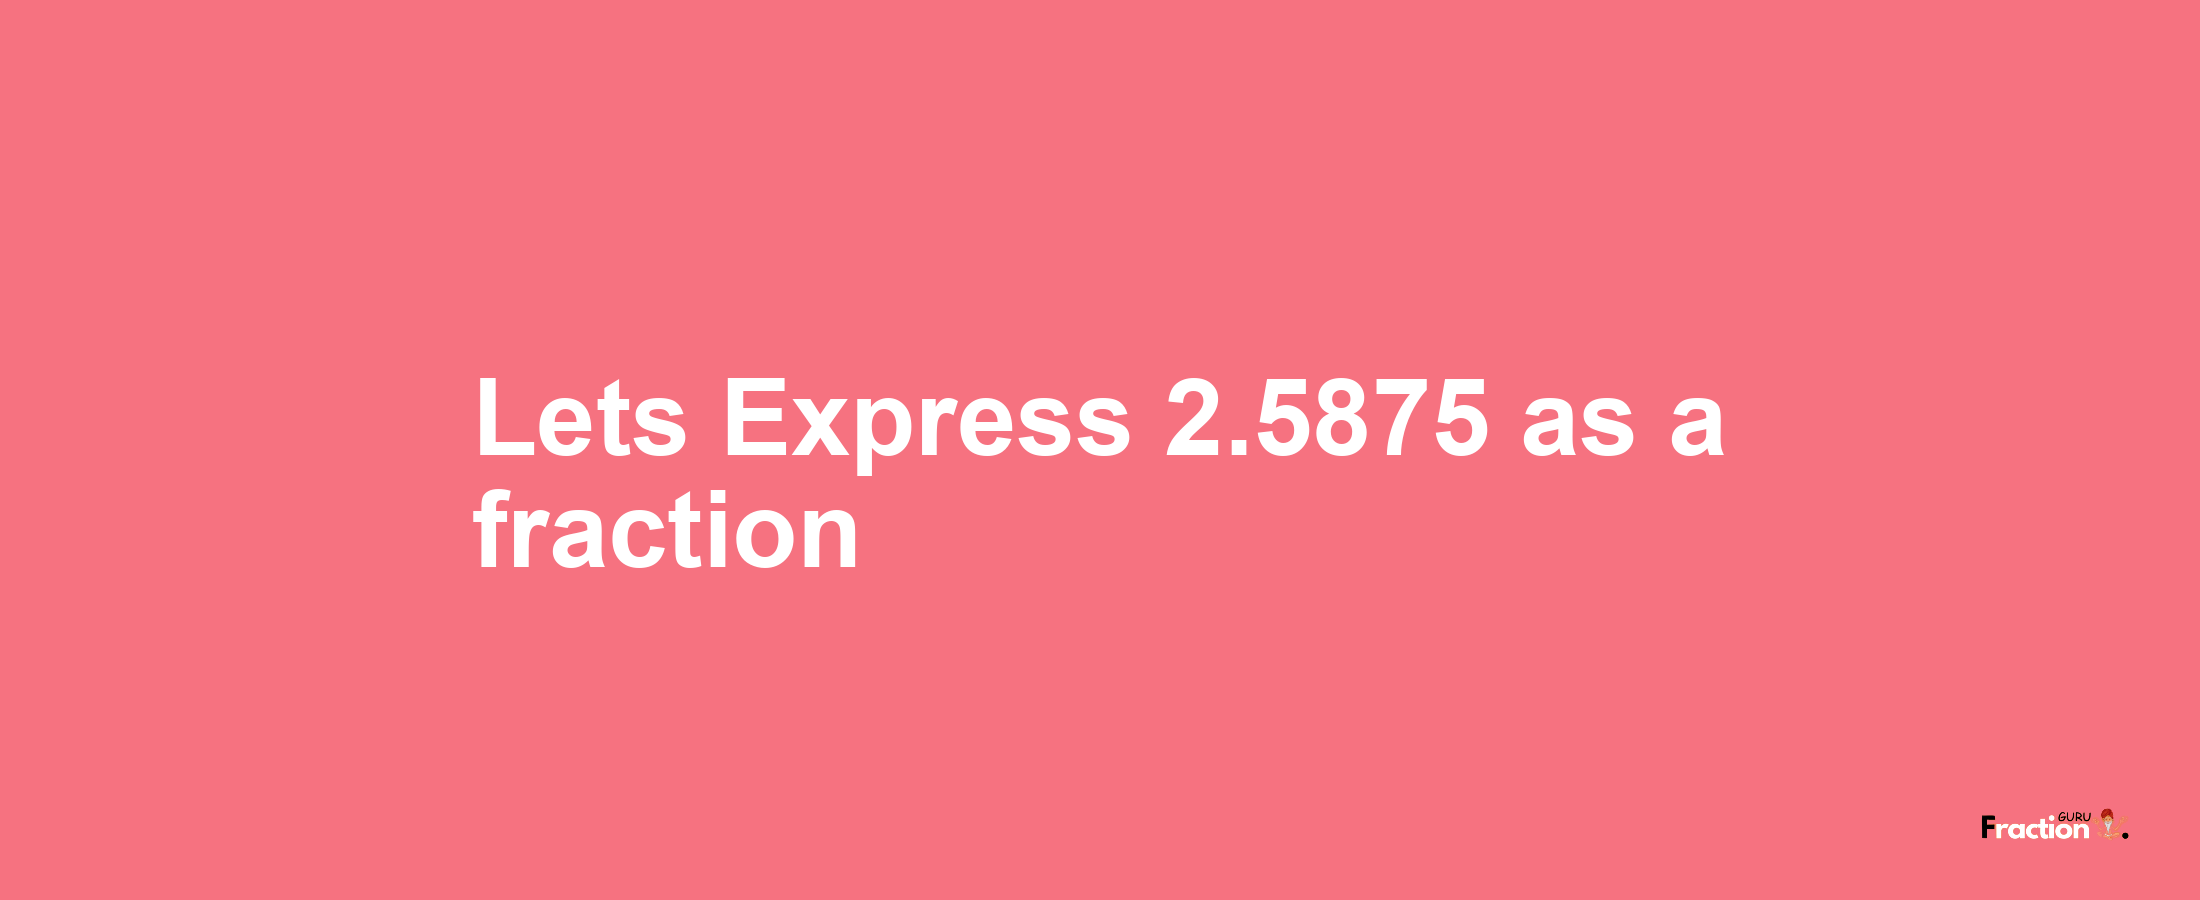 Lets Express 2.5875 as afraction